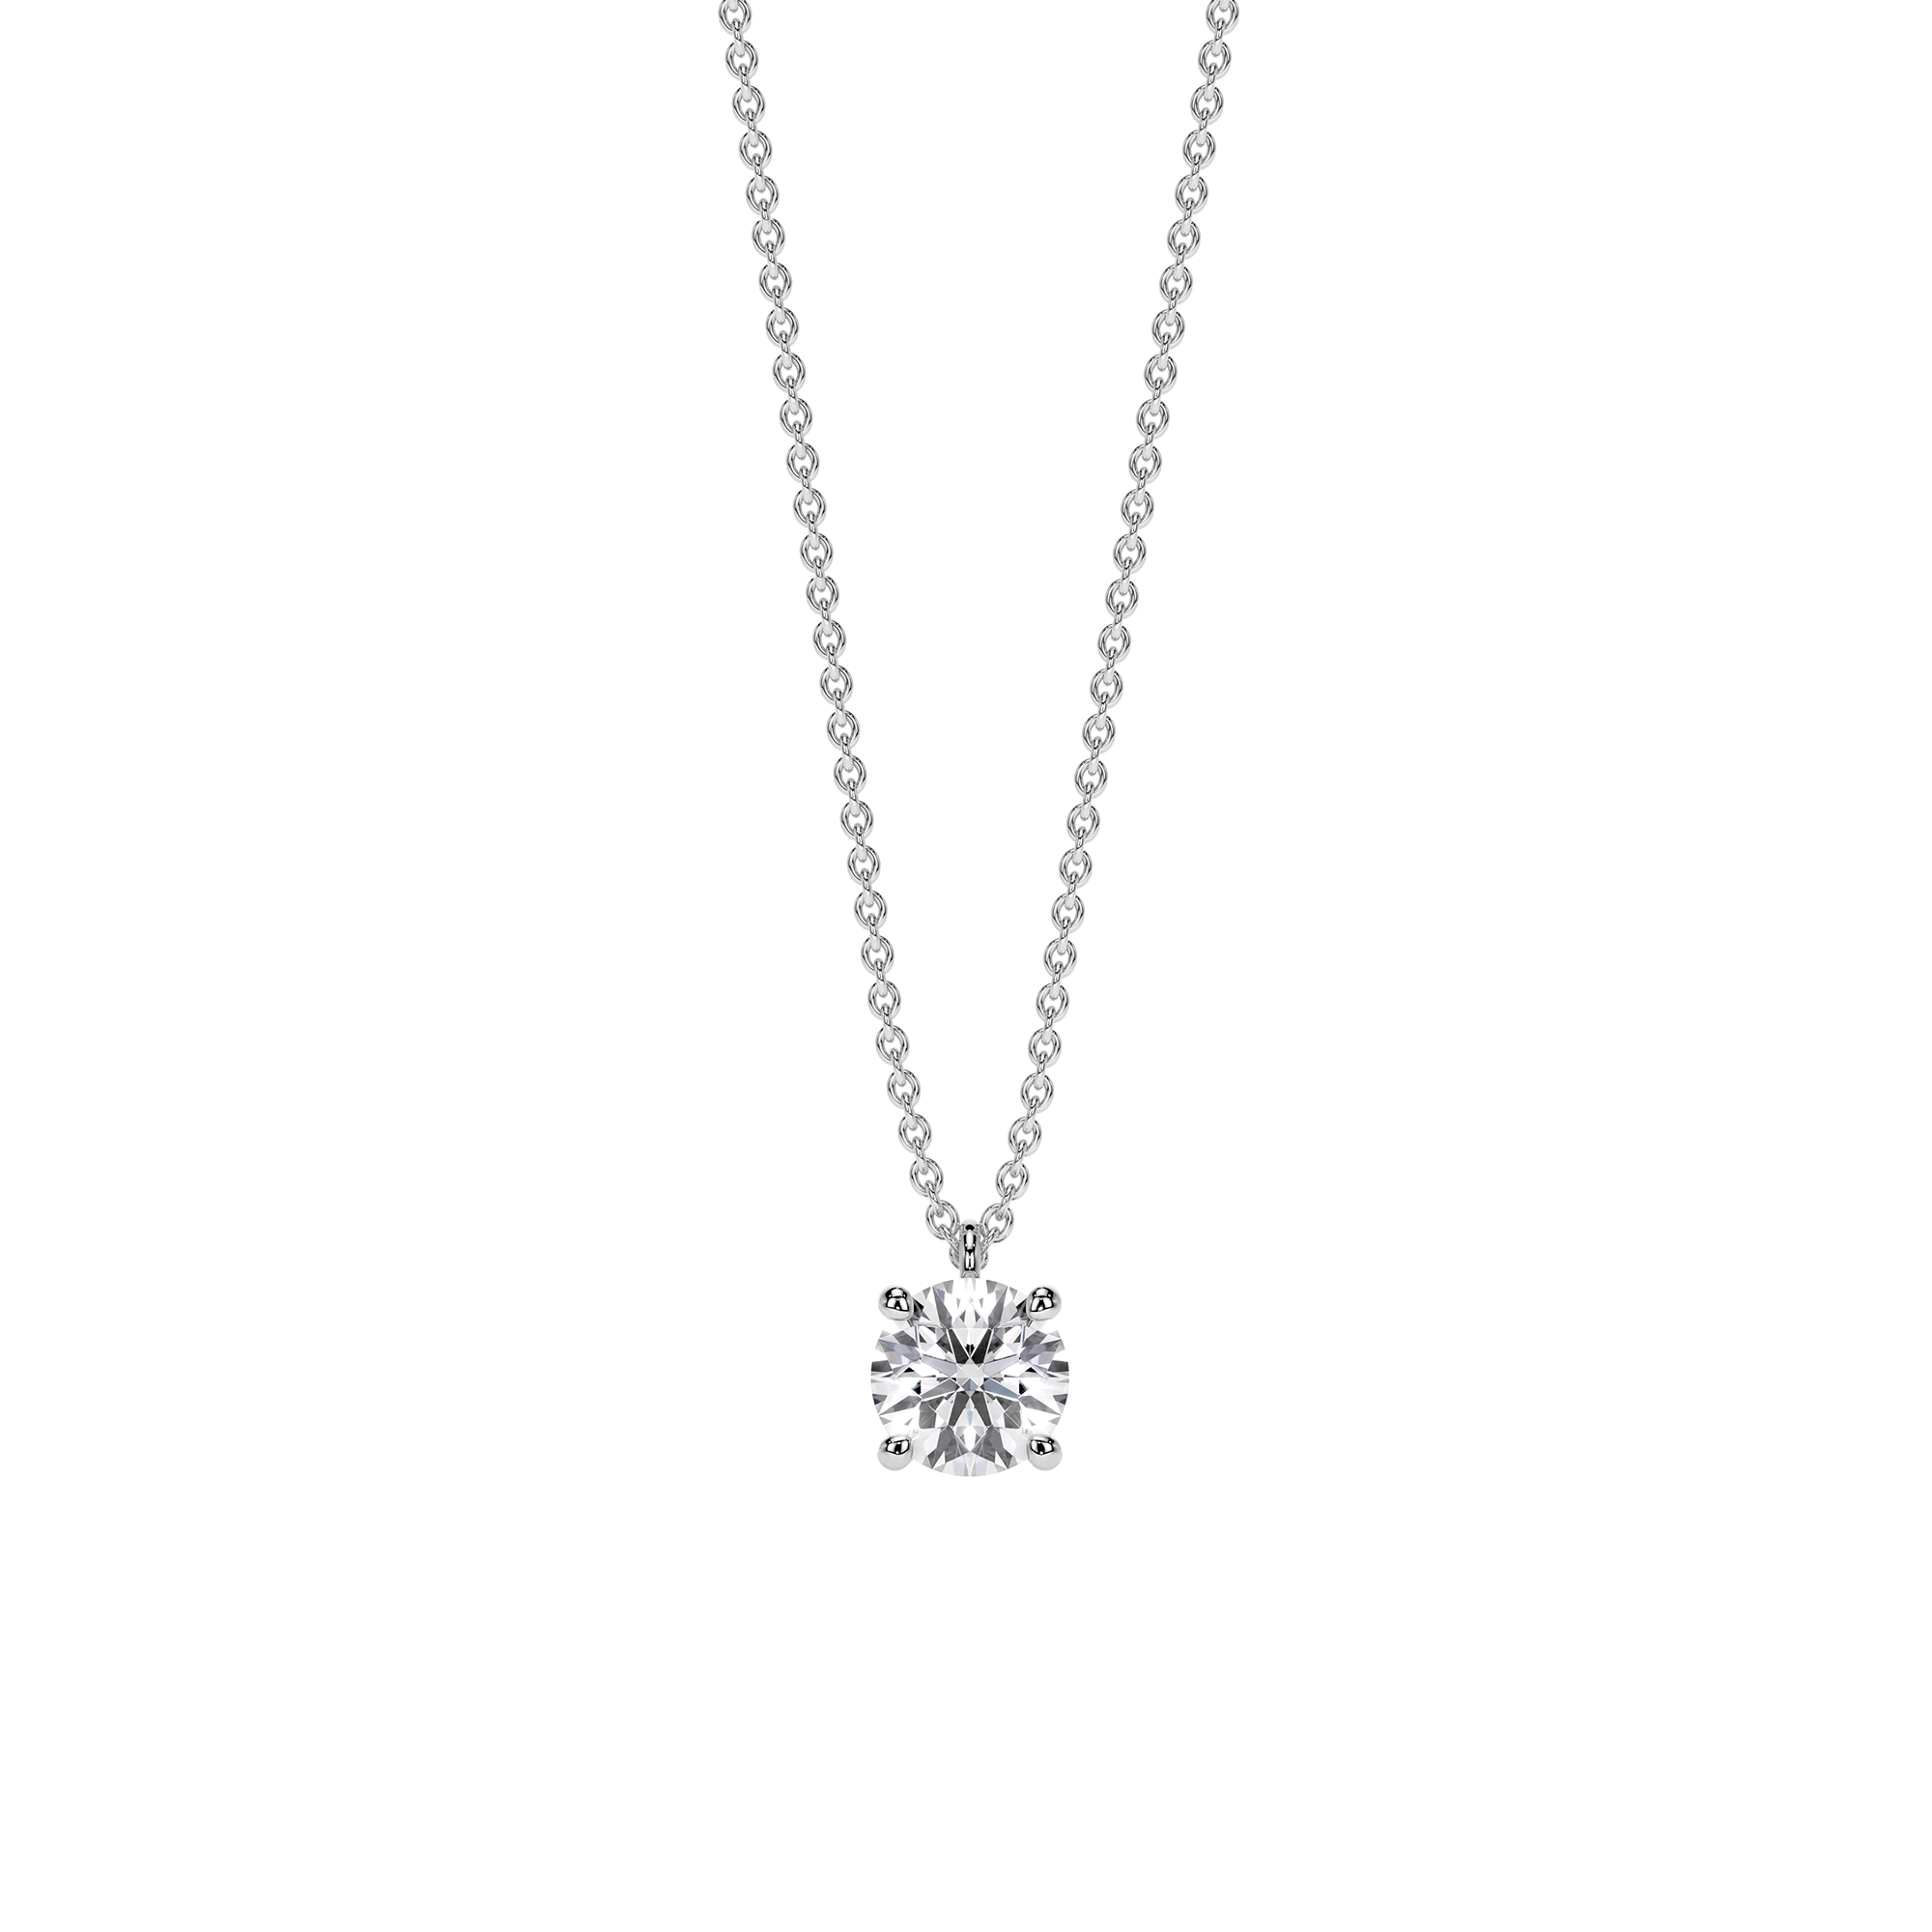 14 k white gold Solitaire necklace, with 1 white 1.00 ct diamond